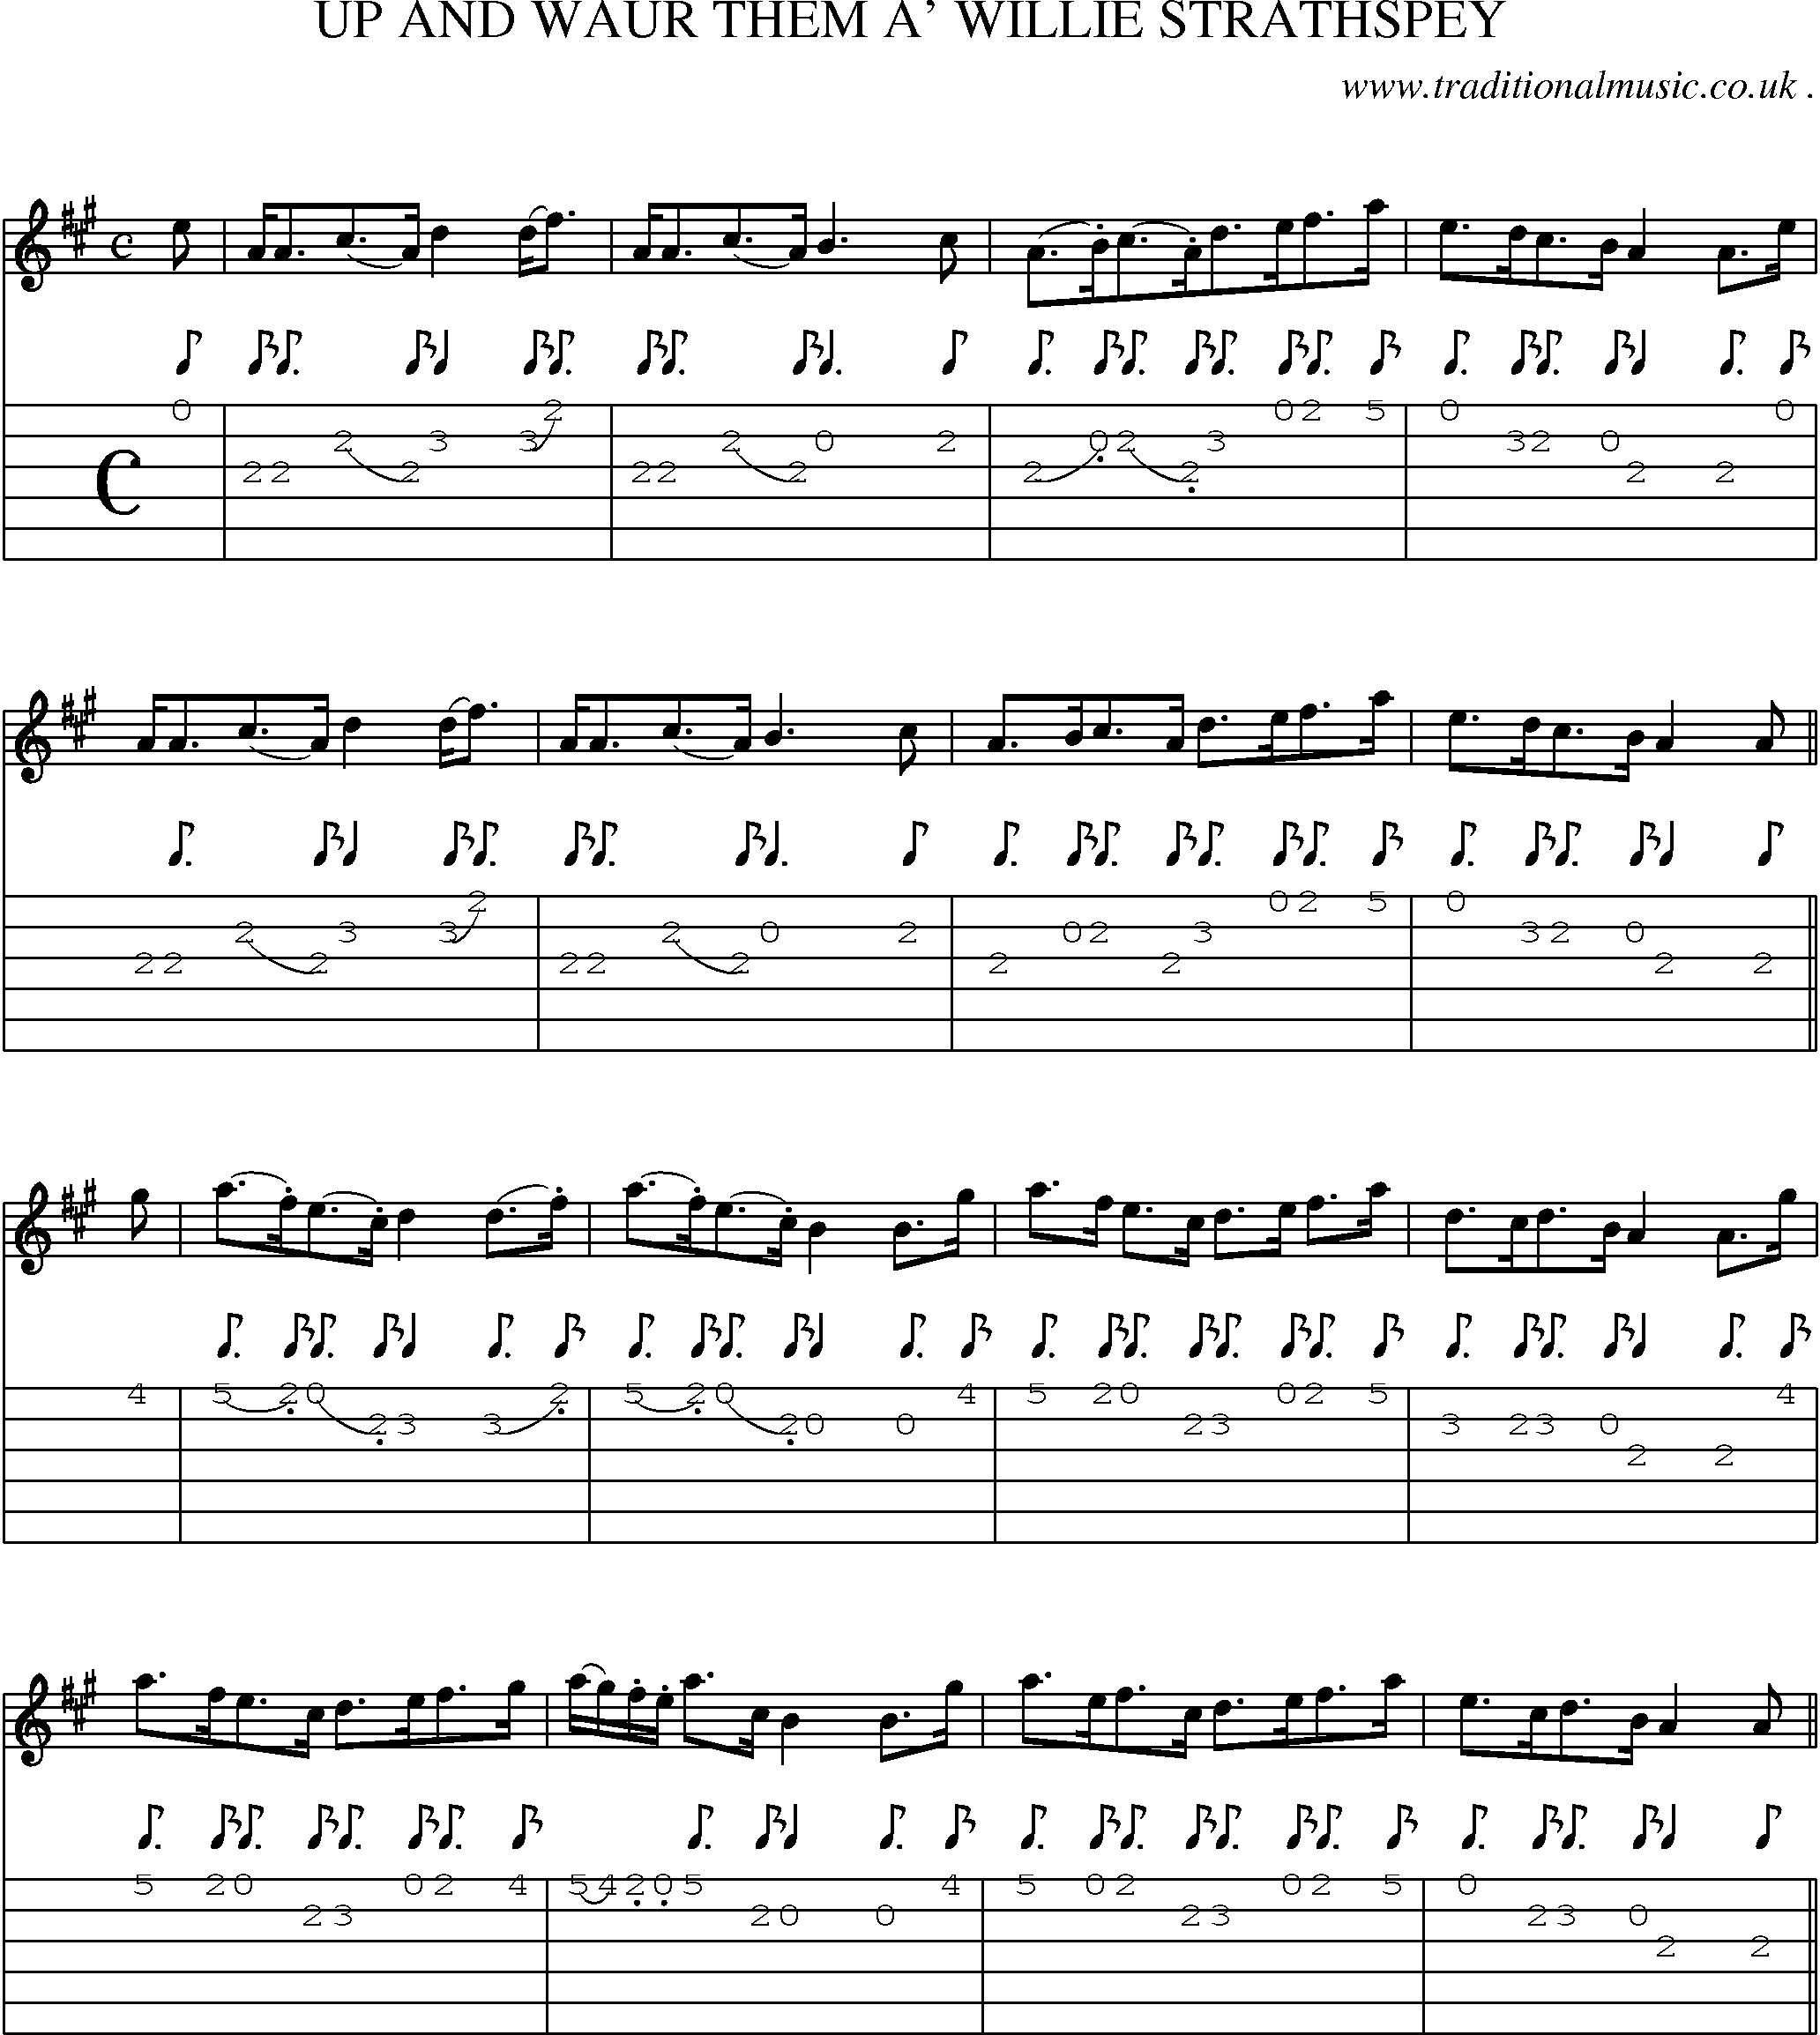 Sheet-Music and Guitar Tabs for Up And Waur Them A Willie Strathspey